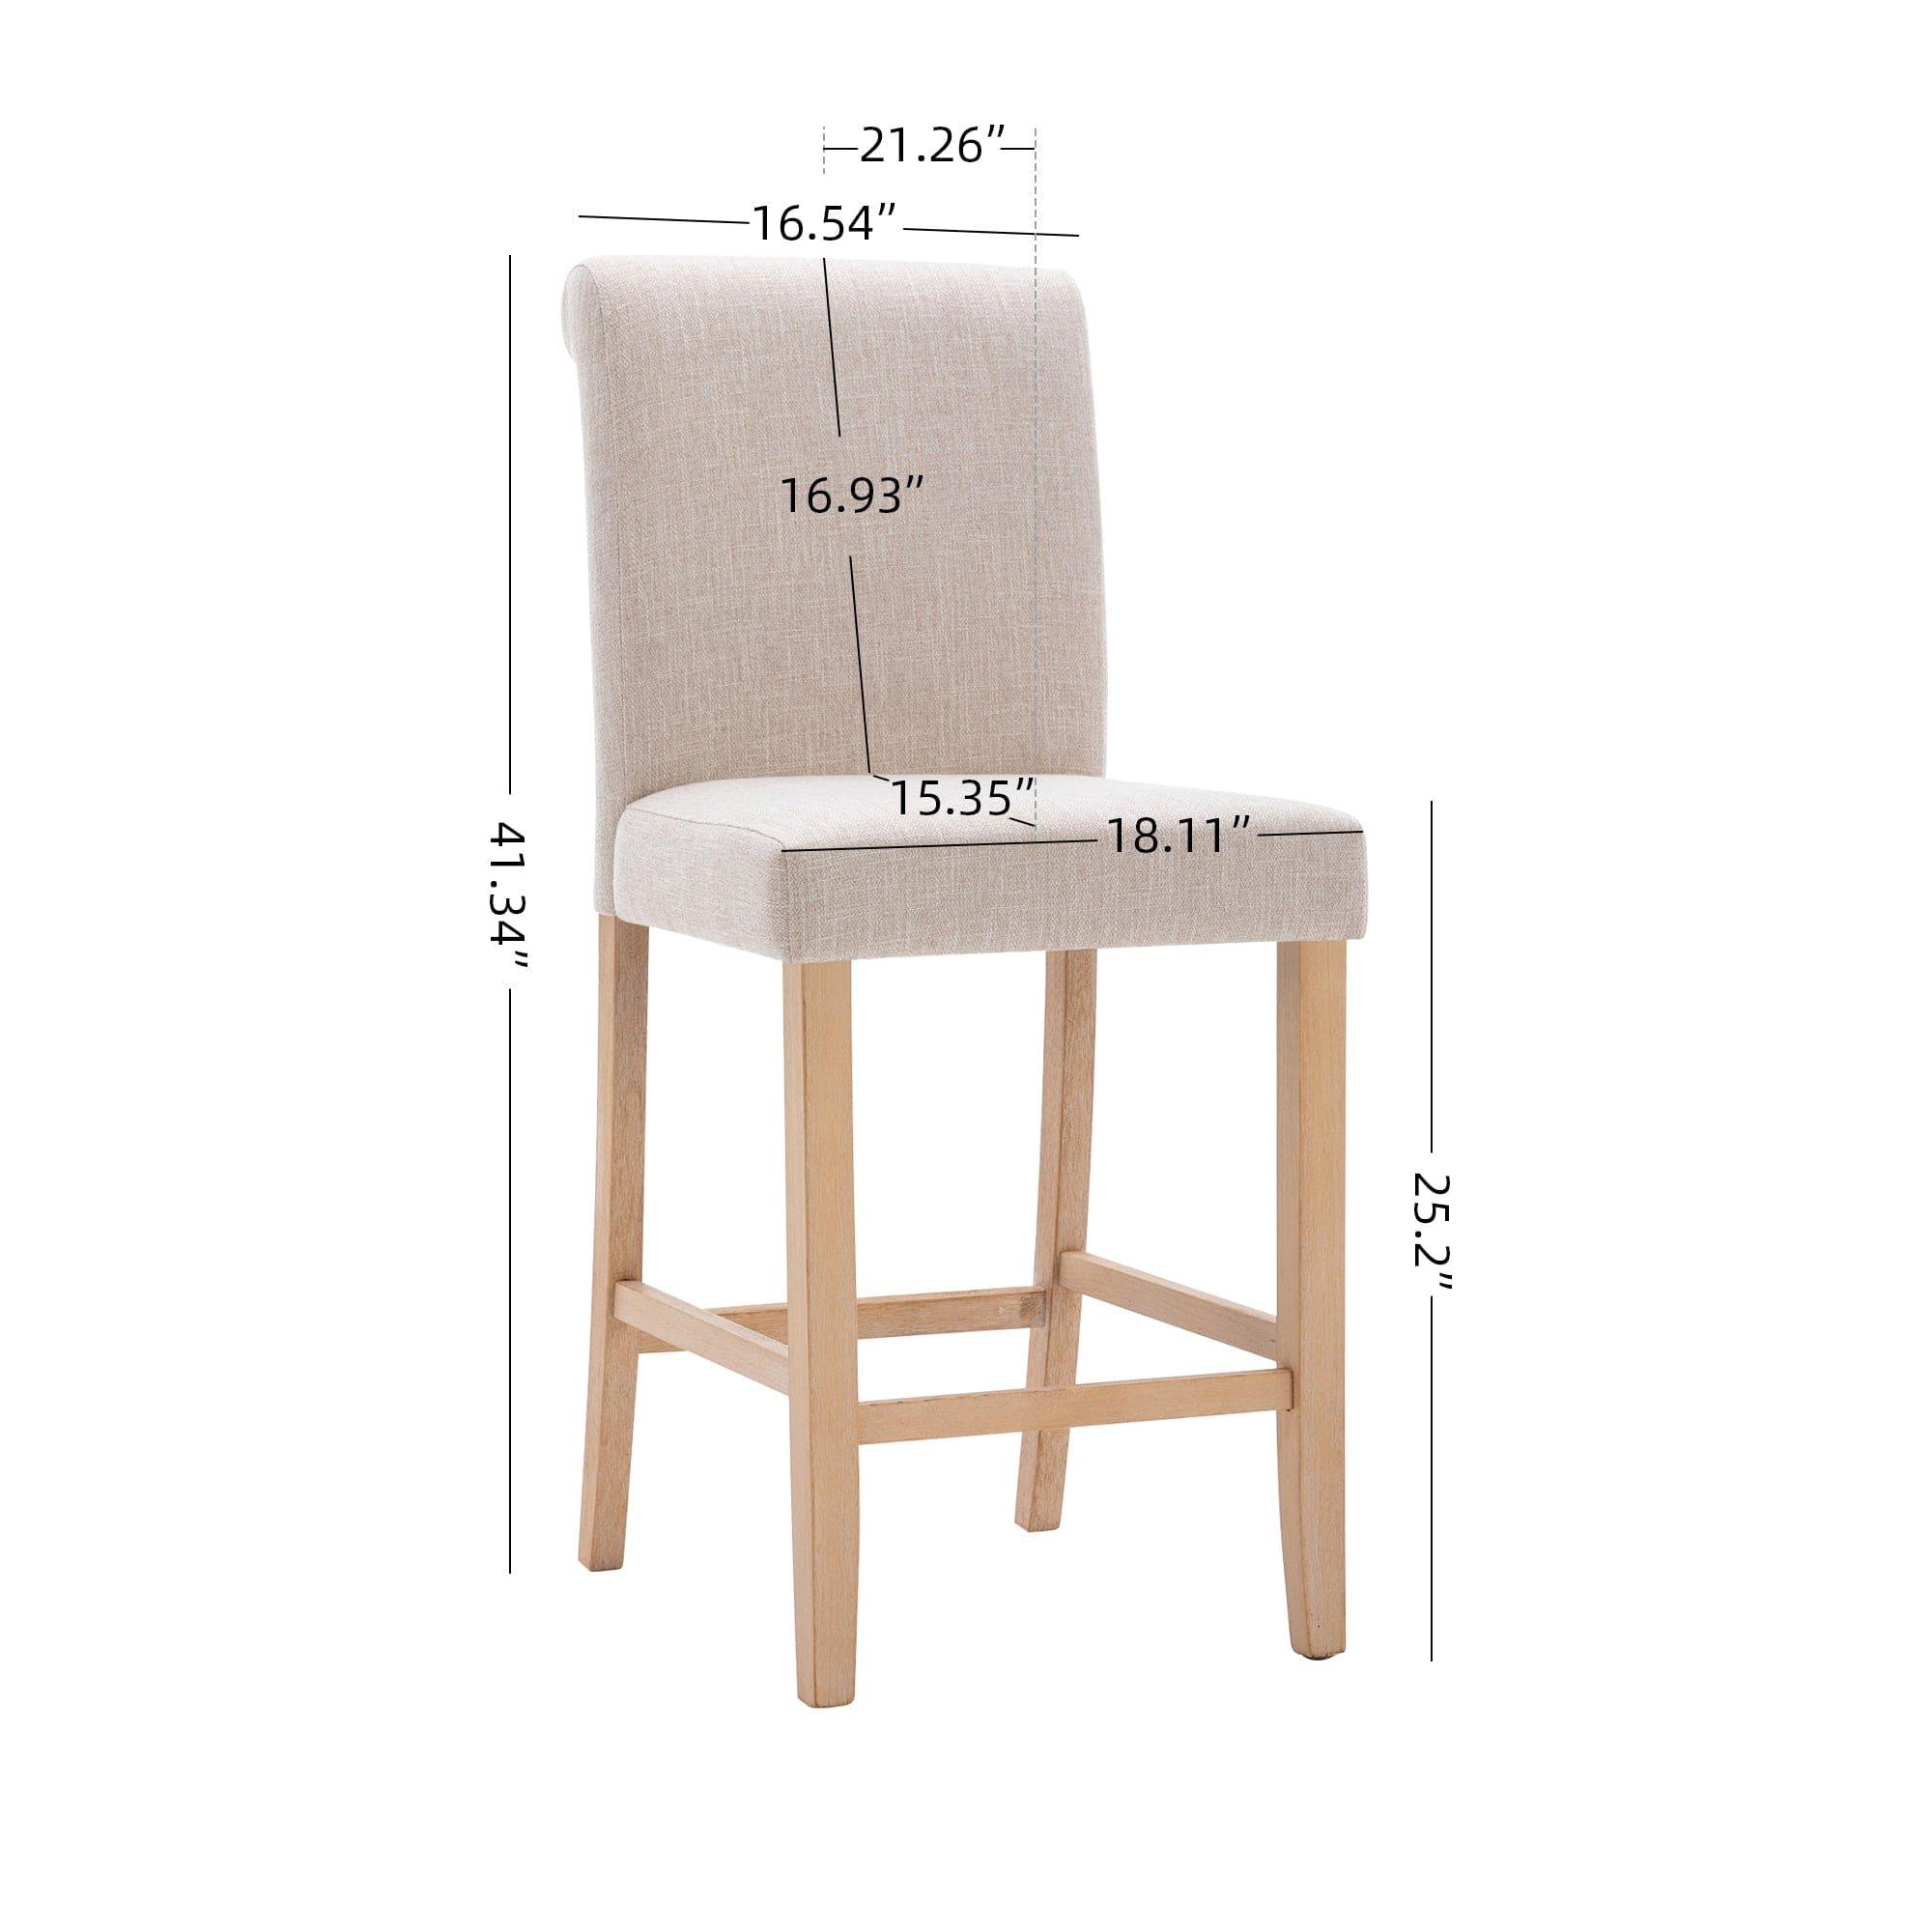 Shop Hengming Set of 2 Bar Stools Soft Cushions with Solid Wood Legs(Beige) Mademoiselle Home Decor